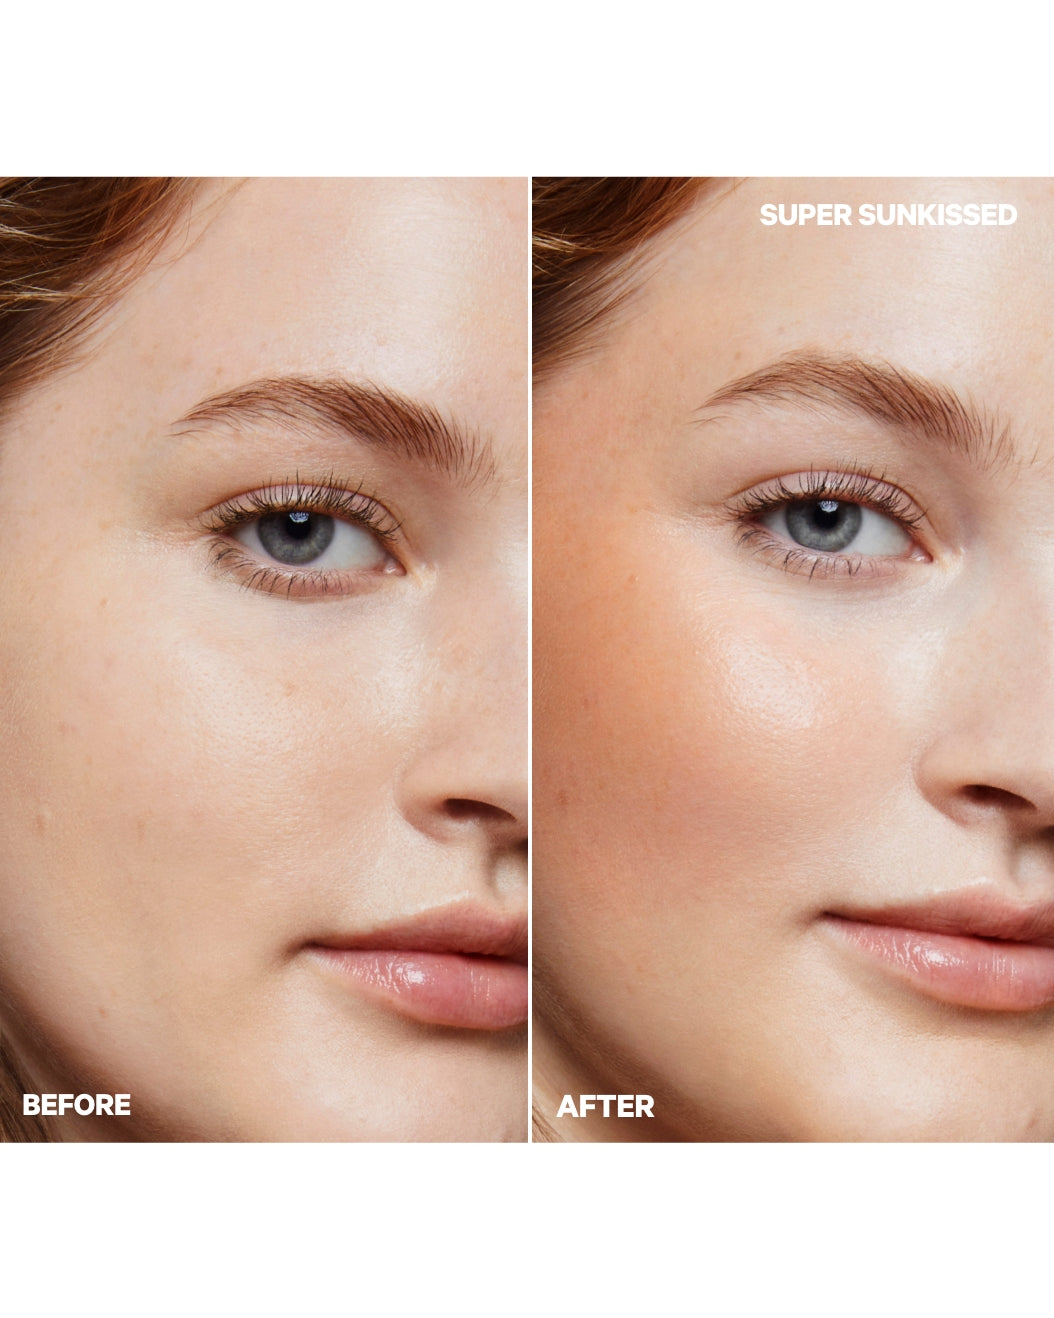 Side-by-side before and after of a model without and with Milk Makeup Matte Bronzer against a white background